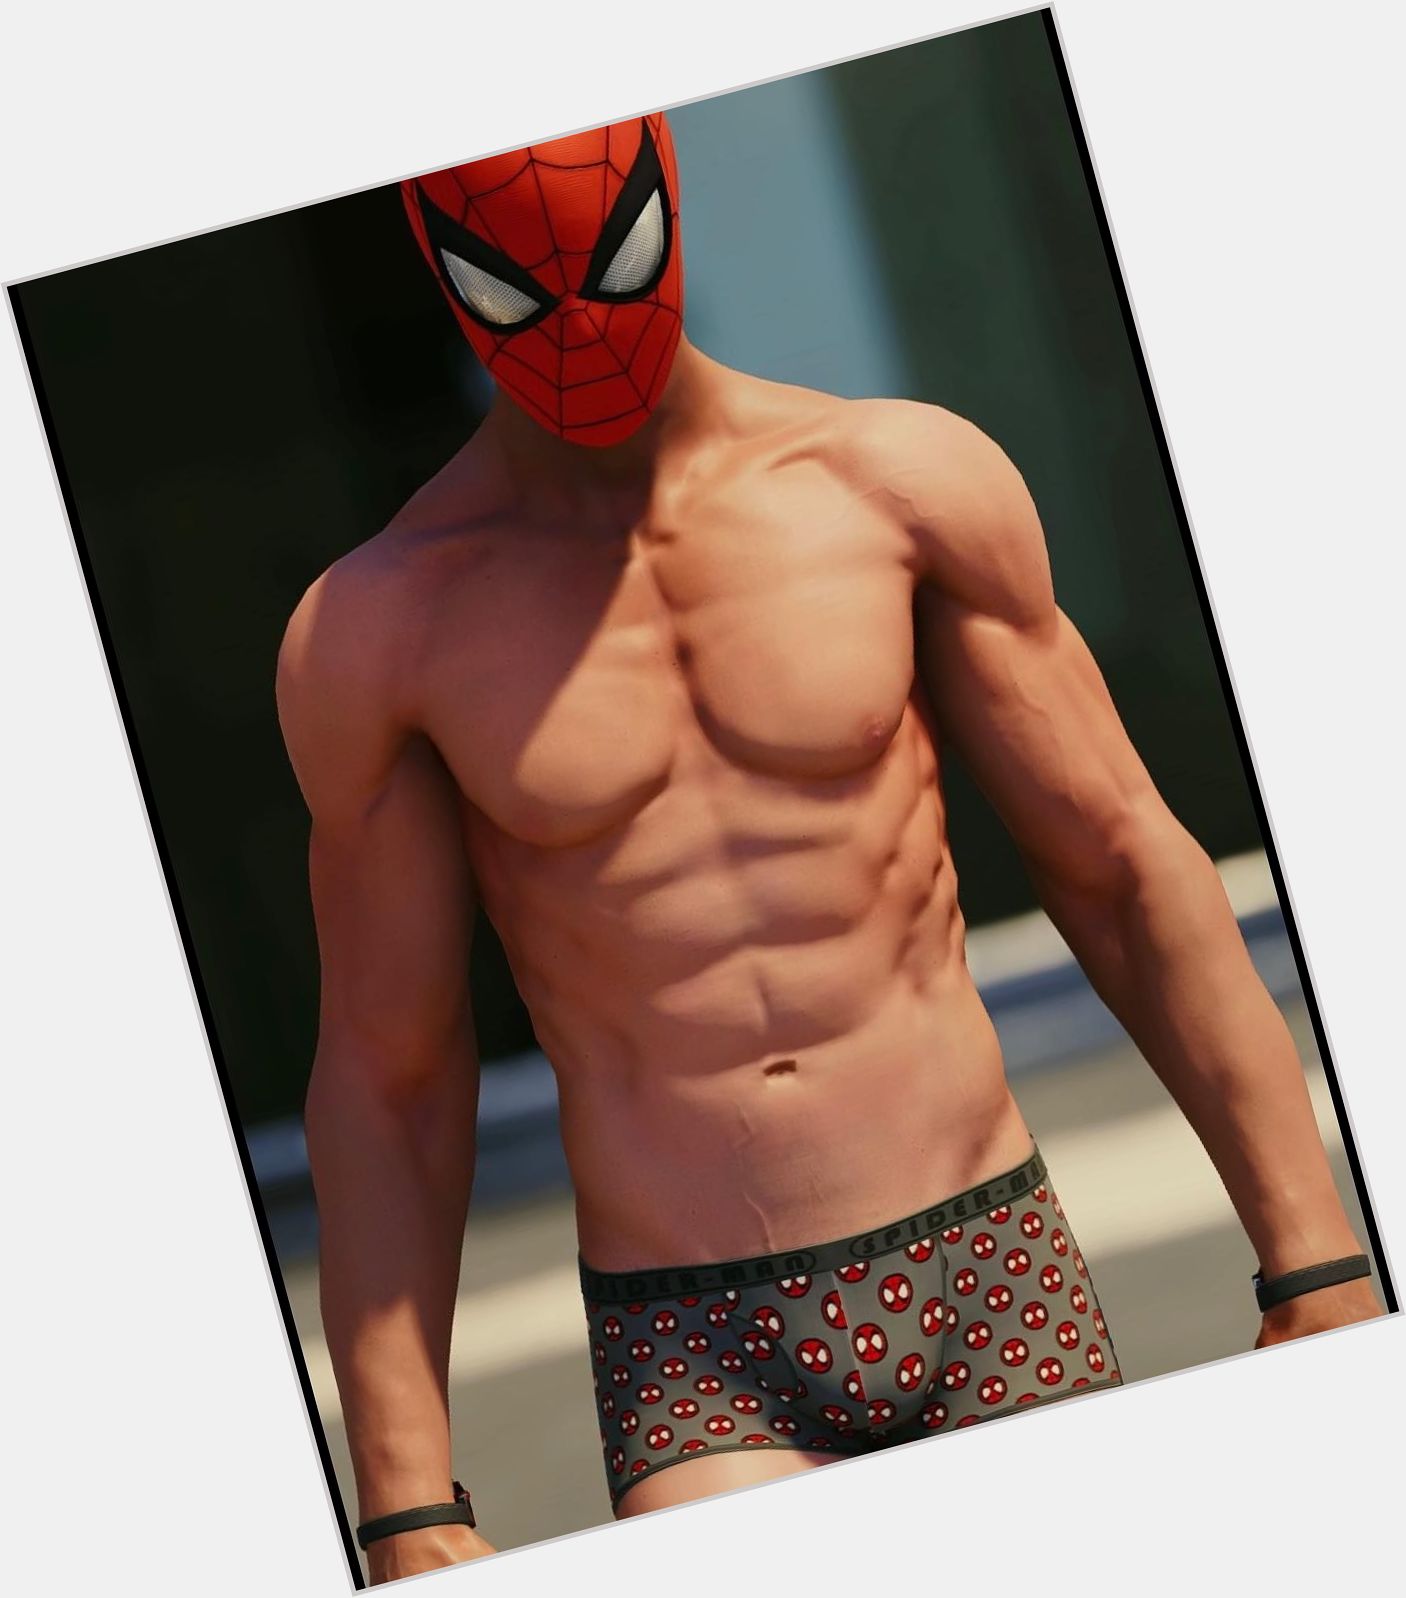 <a href="/hot-men/spider-man/is-he-spiderman-real-avenger-marvel-dc-or">Spider Man</a> Athletic body,  dark brown hair & hairstyles